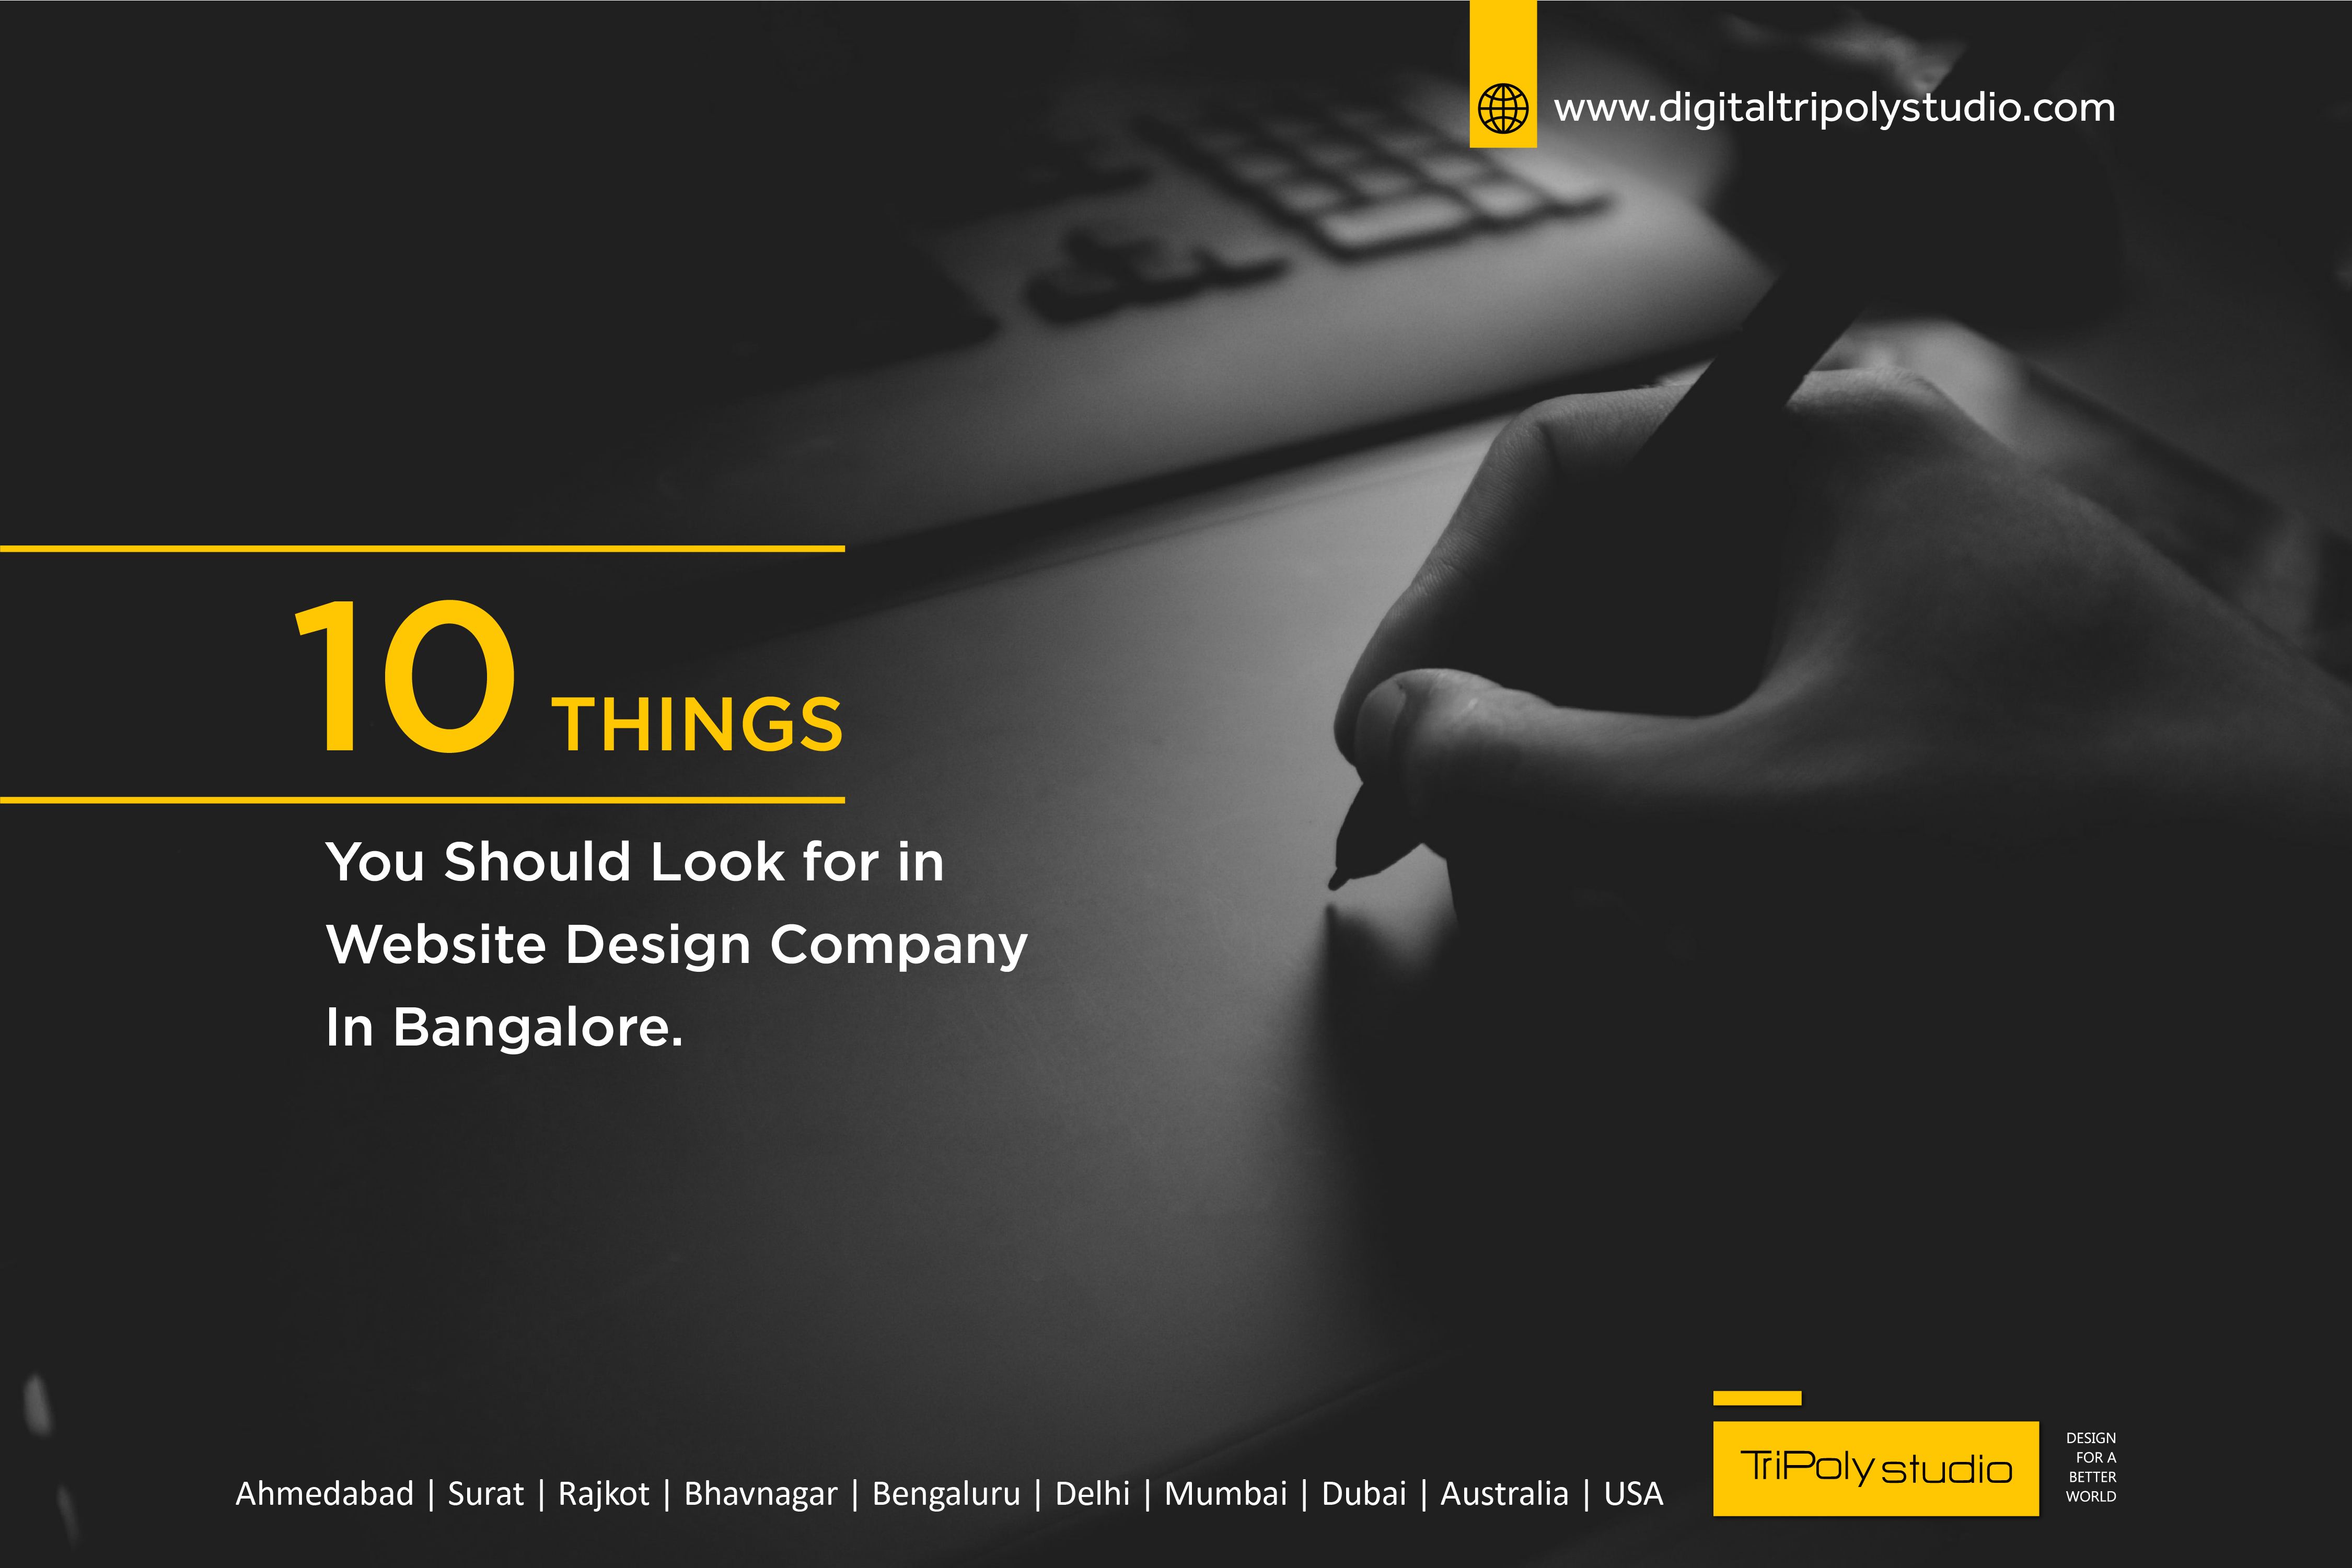 10 things you should look for in website design company in bangalore